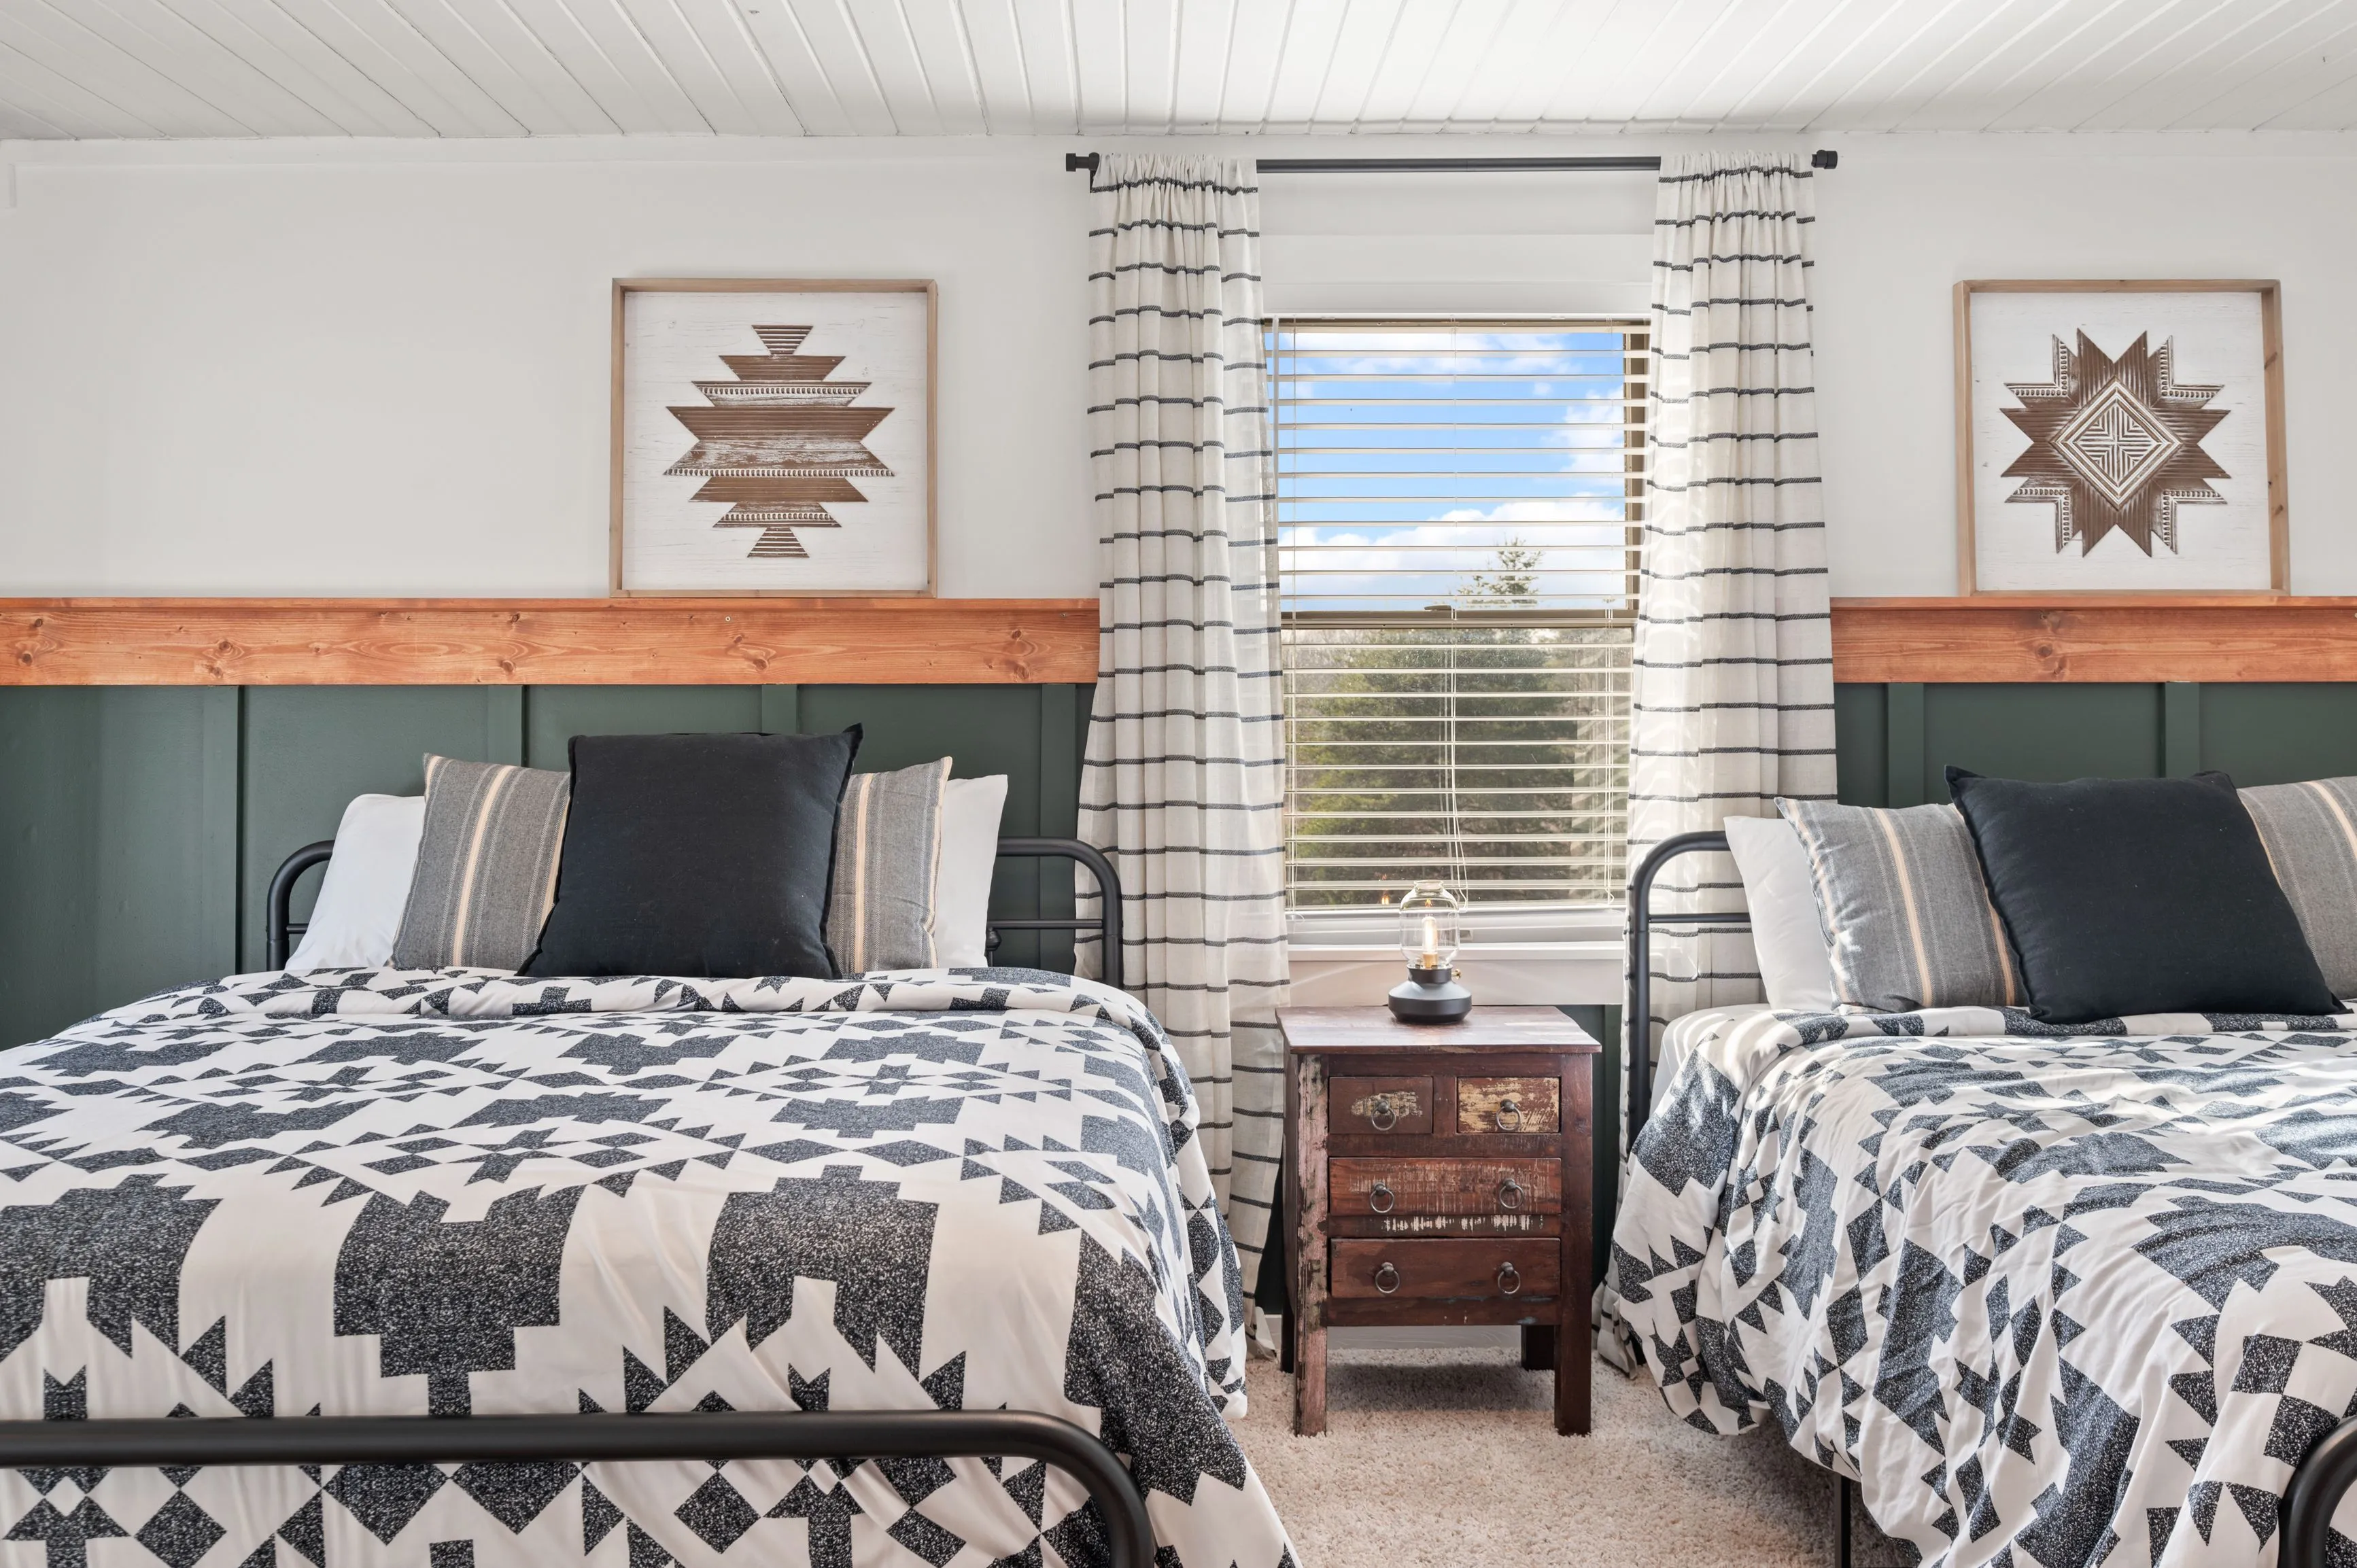 Cozy bedroom with two single beds with black and white geometric patterned bedding, rustic wooden headboards and decorative framed art above, dark green paneled walls, and a sunny window with striped curtains.